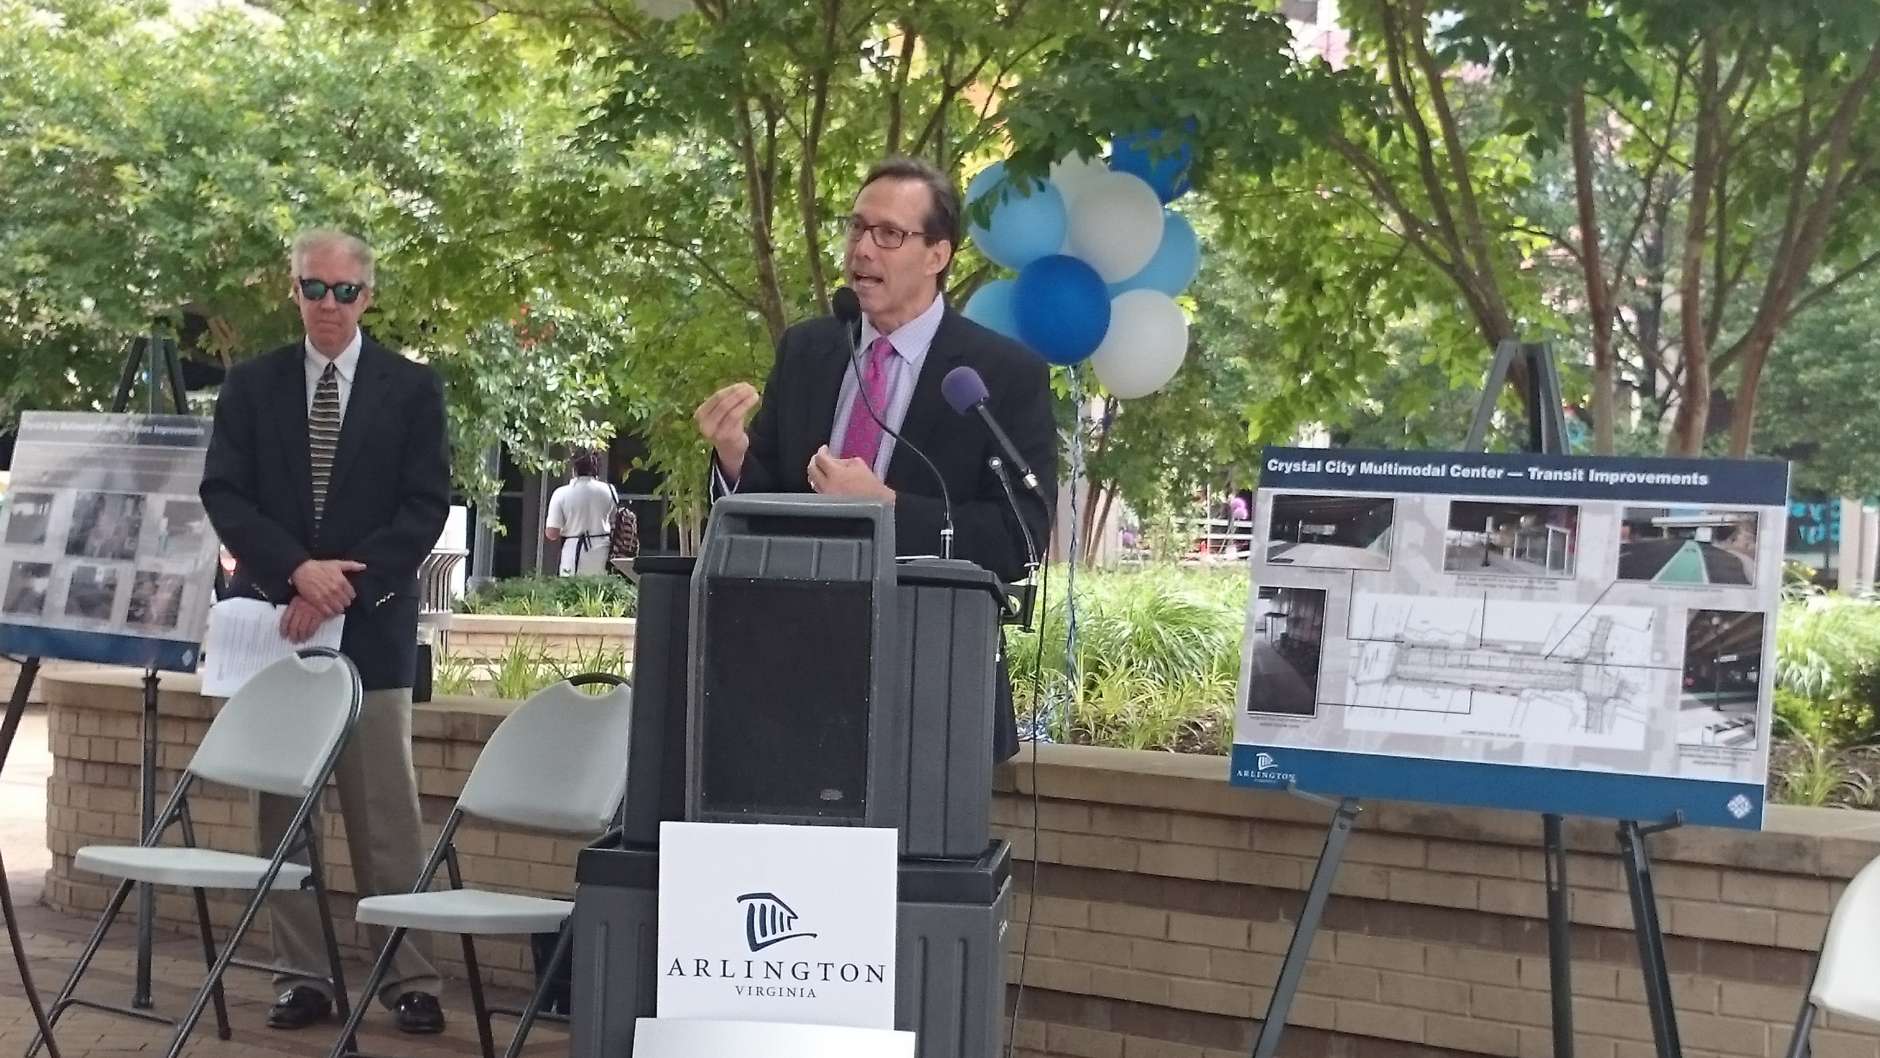 Arlington County Board chairman Jay Fisette speaking at the new Crystal City Multimodal Center. (WTOP/Dennis Foley)